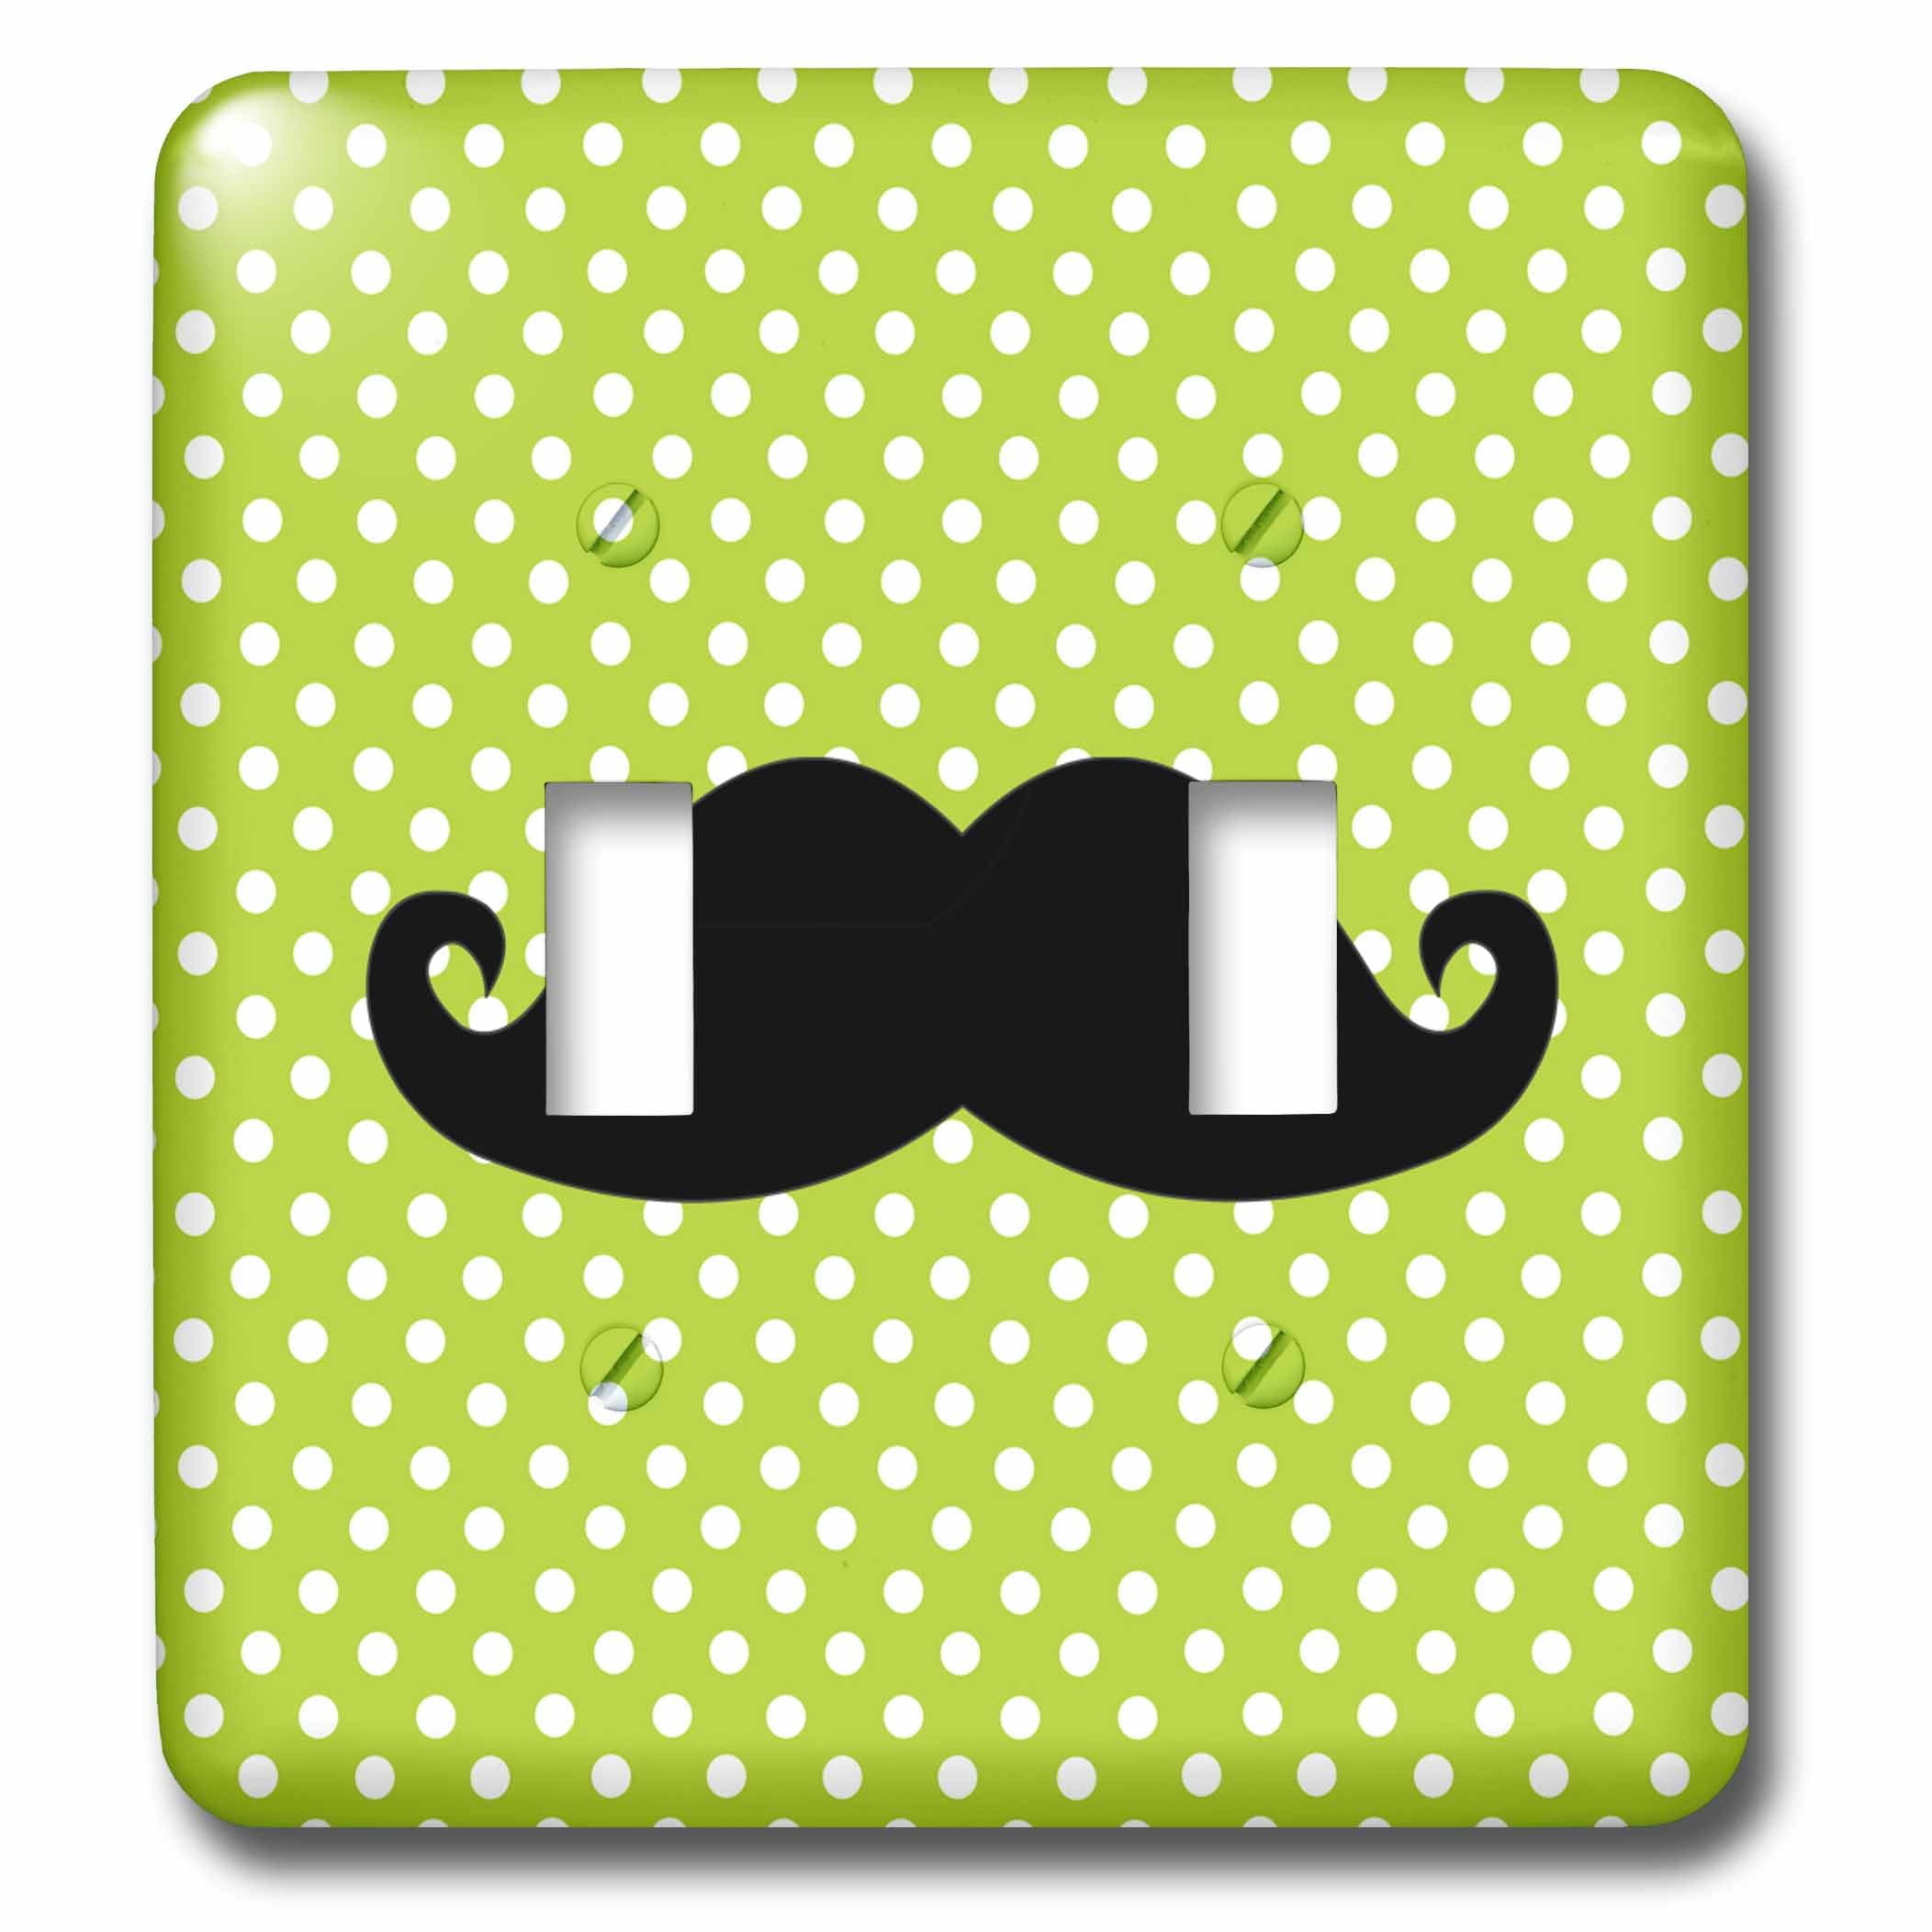 3dRose lsp_56695_6 White Polka Dots on Green Retro 1950S Vintage Style Dot Pattern 2 Plug Outlet Cover